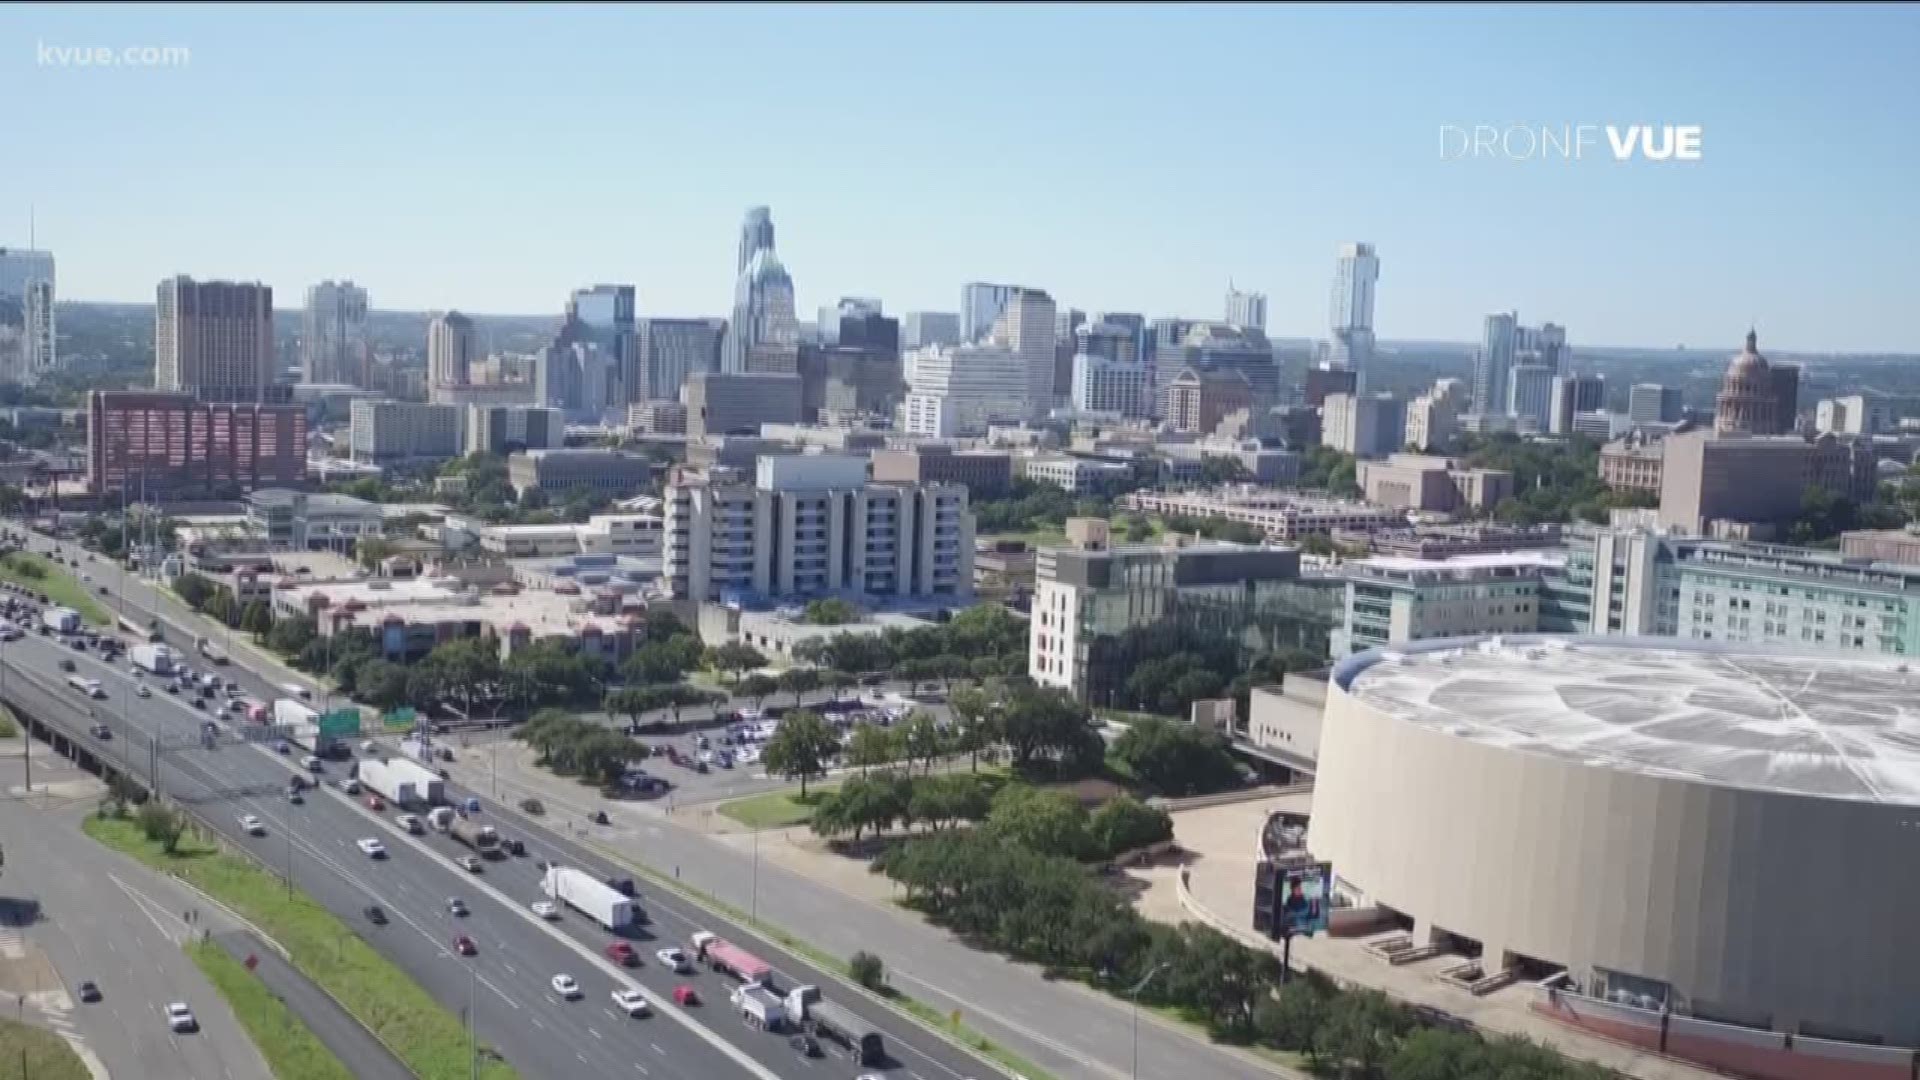 Numbers show rent has increased in Austin nearly 93% since 2010, the highest mark of any major city in the country.